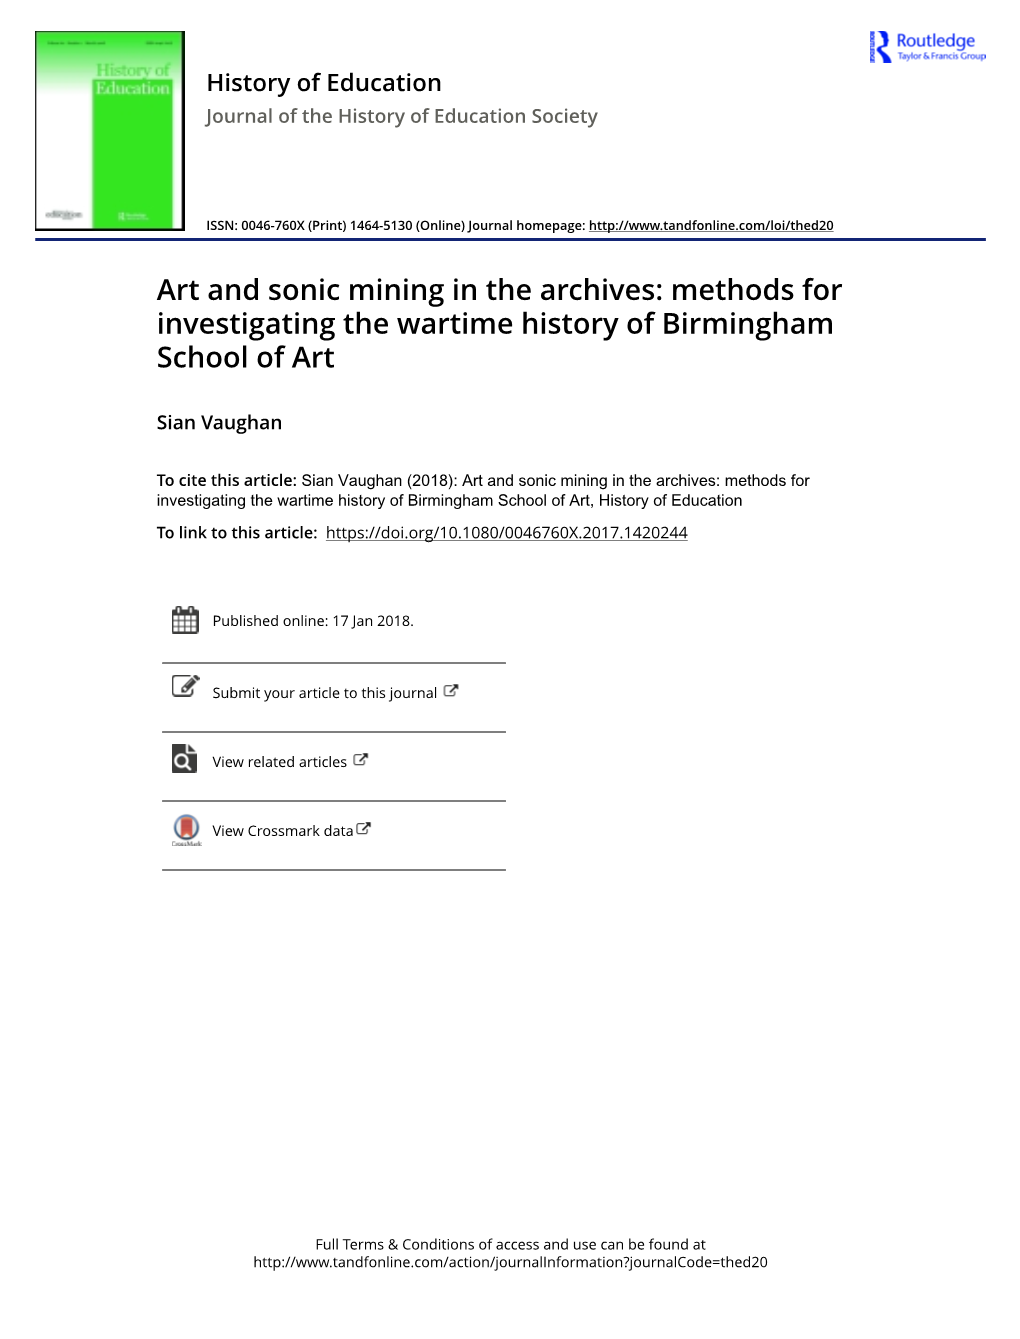 Art and Sonic Mining in the Archives: Methods for Investigating the Wartime History of Birmingham School of Art